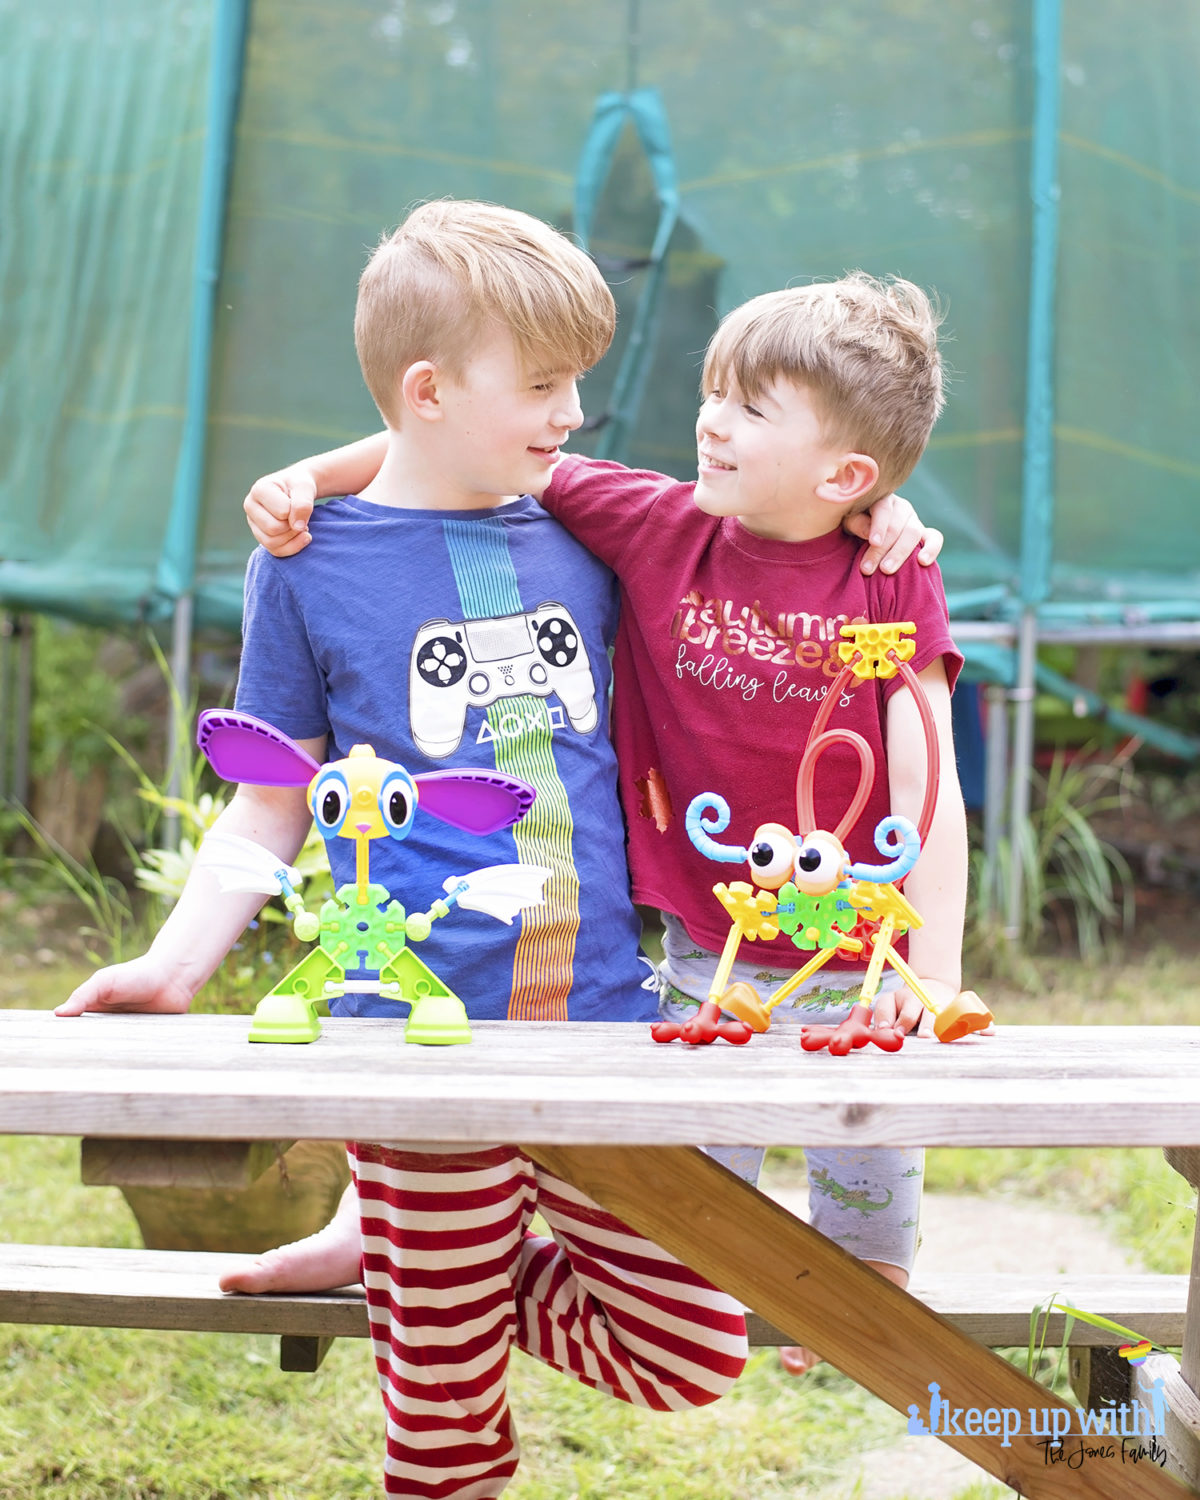 Image shows two boys with their arm around each other's shoulders, looking at each other.  On the wooden picnic table in front of them are two creatures which are made from pieces of the Kid K'nex Budding Builders construction toys box from Basic Fun UK.  By Keep Up With The Jones Family.